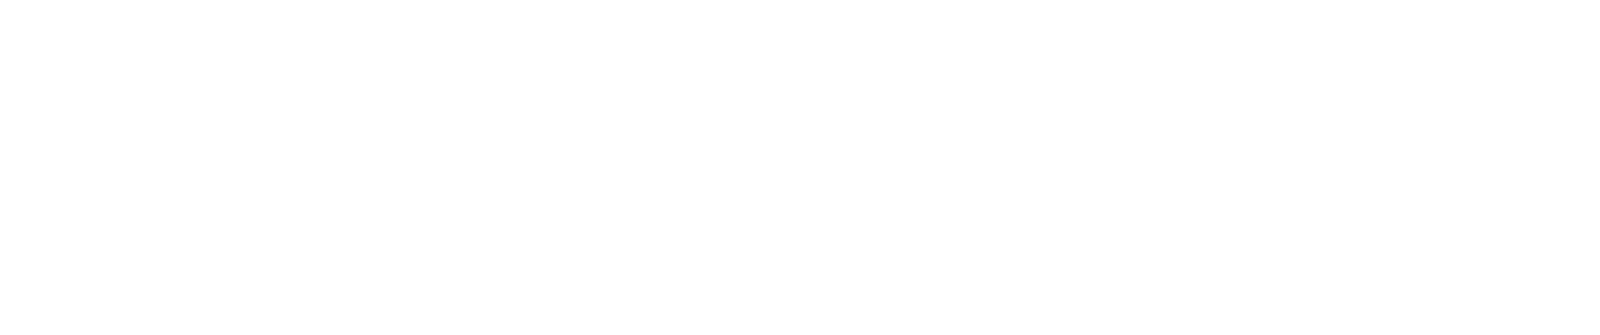 2018 Out Of The Box Directed By joe jaeger